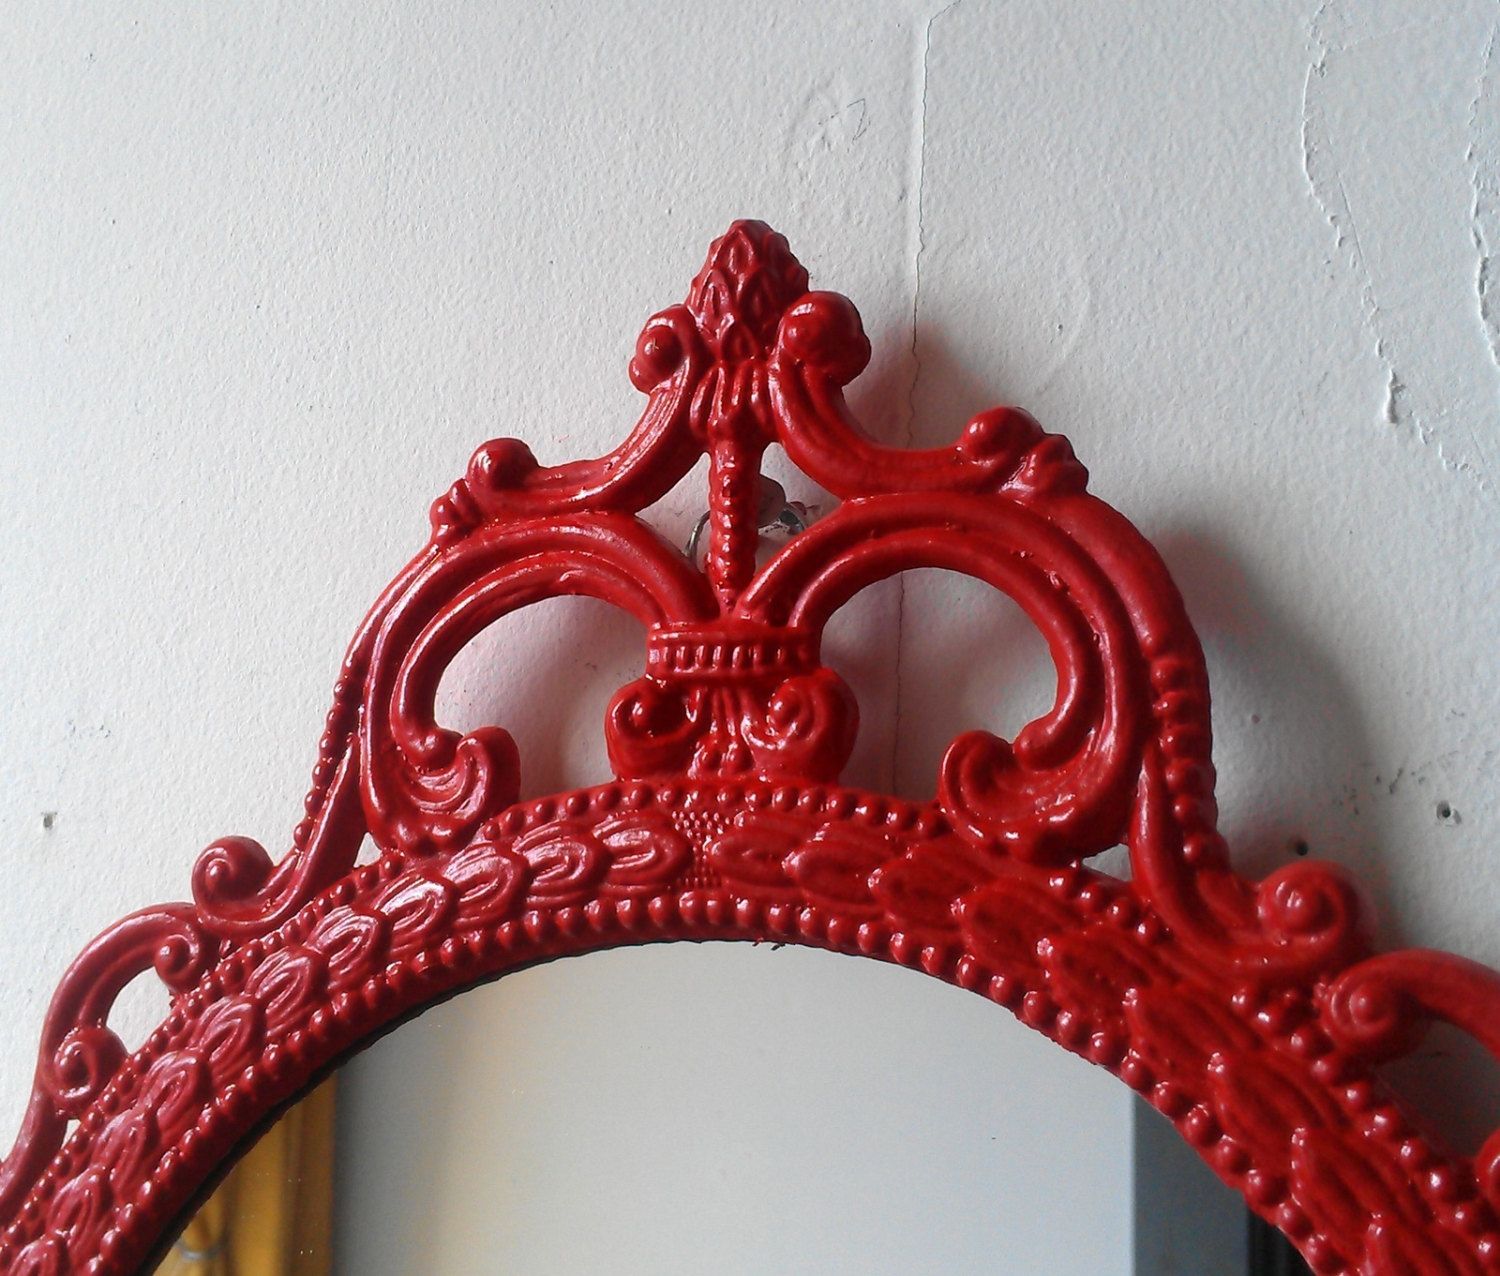 Oval Mirror In Vintage Metal Frame Ornate Decorative Framed In Red Wall Mirrors (View 4 of 15)